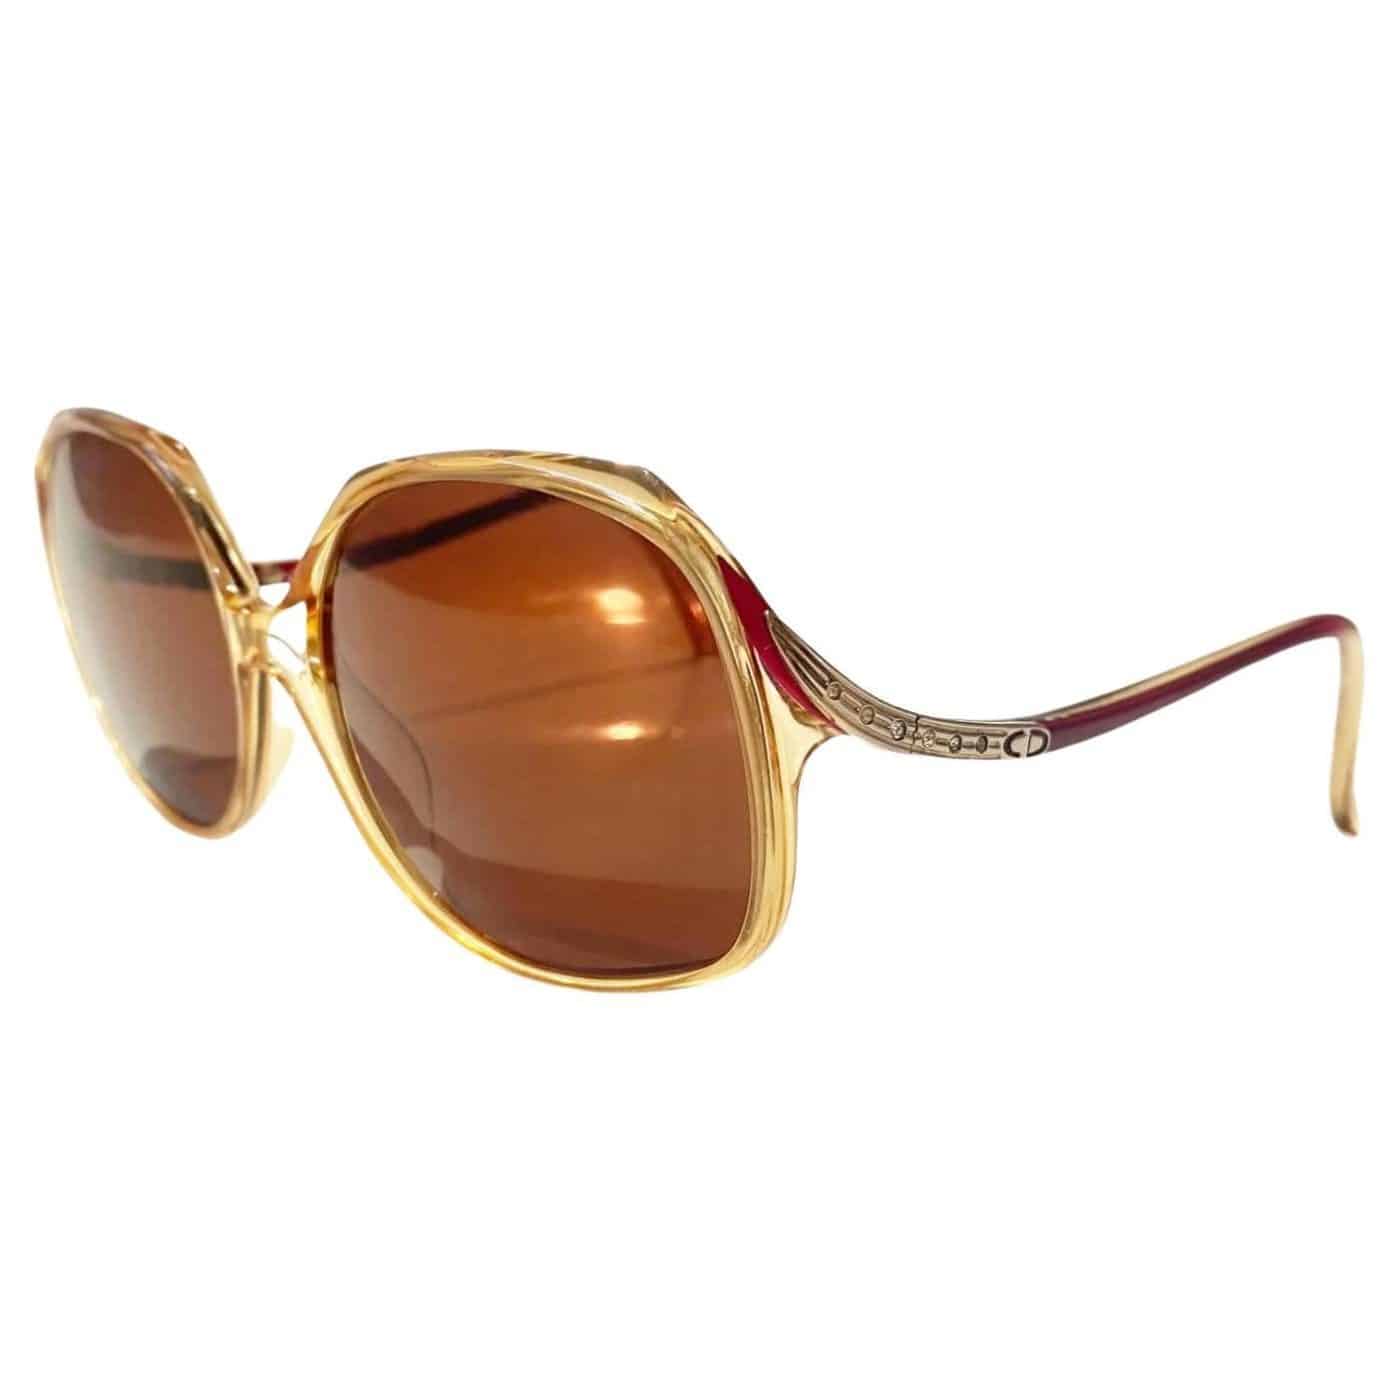 A pair of oversize 1980s Christian Dior sunglasses